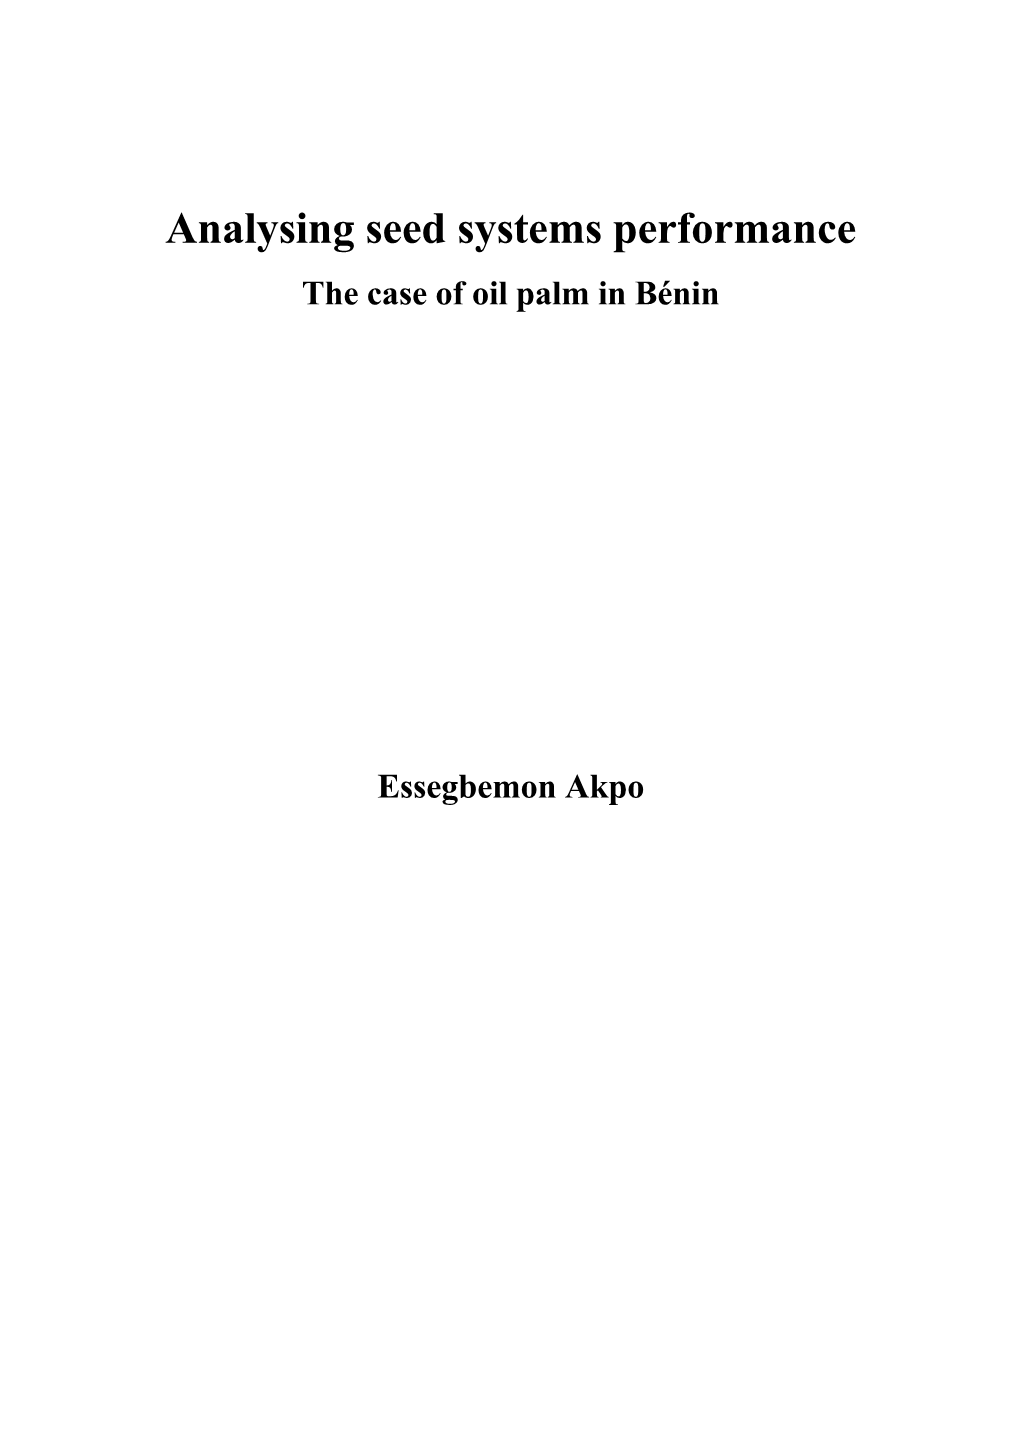 Analysing Seed Systems Performance: the Case of Oil Palm in Bénin, 201 Pages